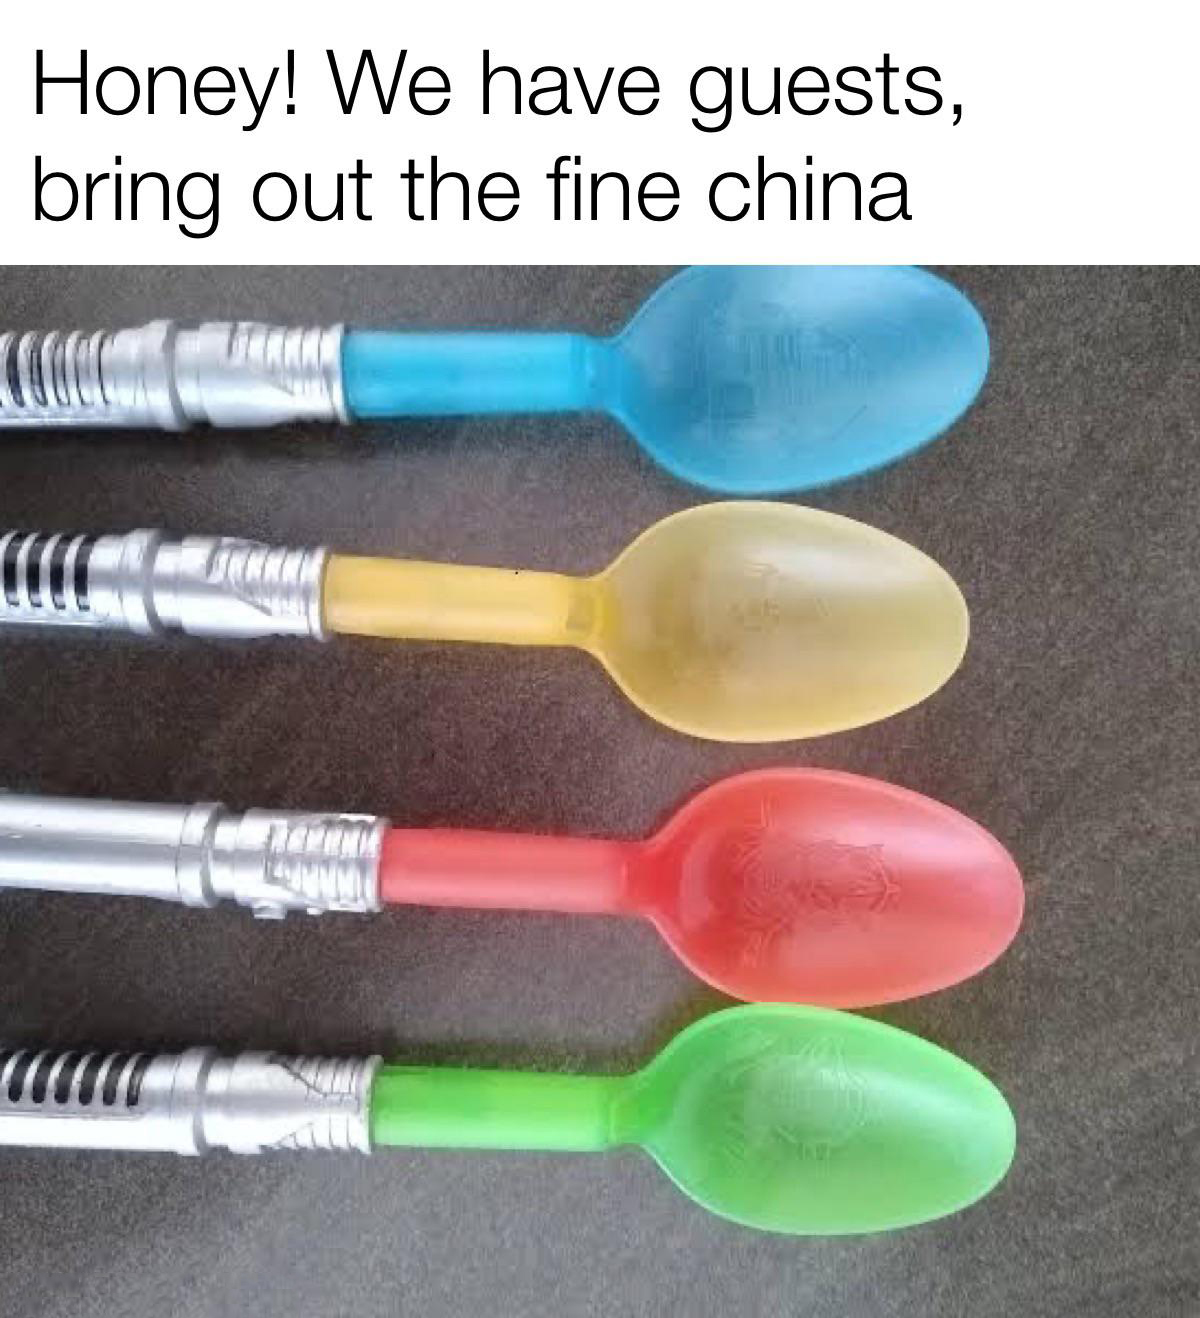 funny memes - dank memes - spoon - Honey! We have guests, bring out the fine china Deren